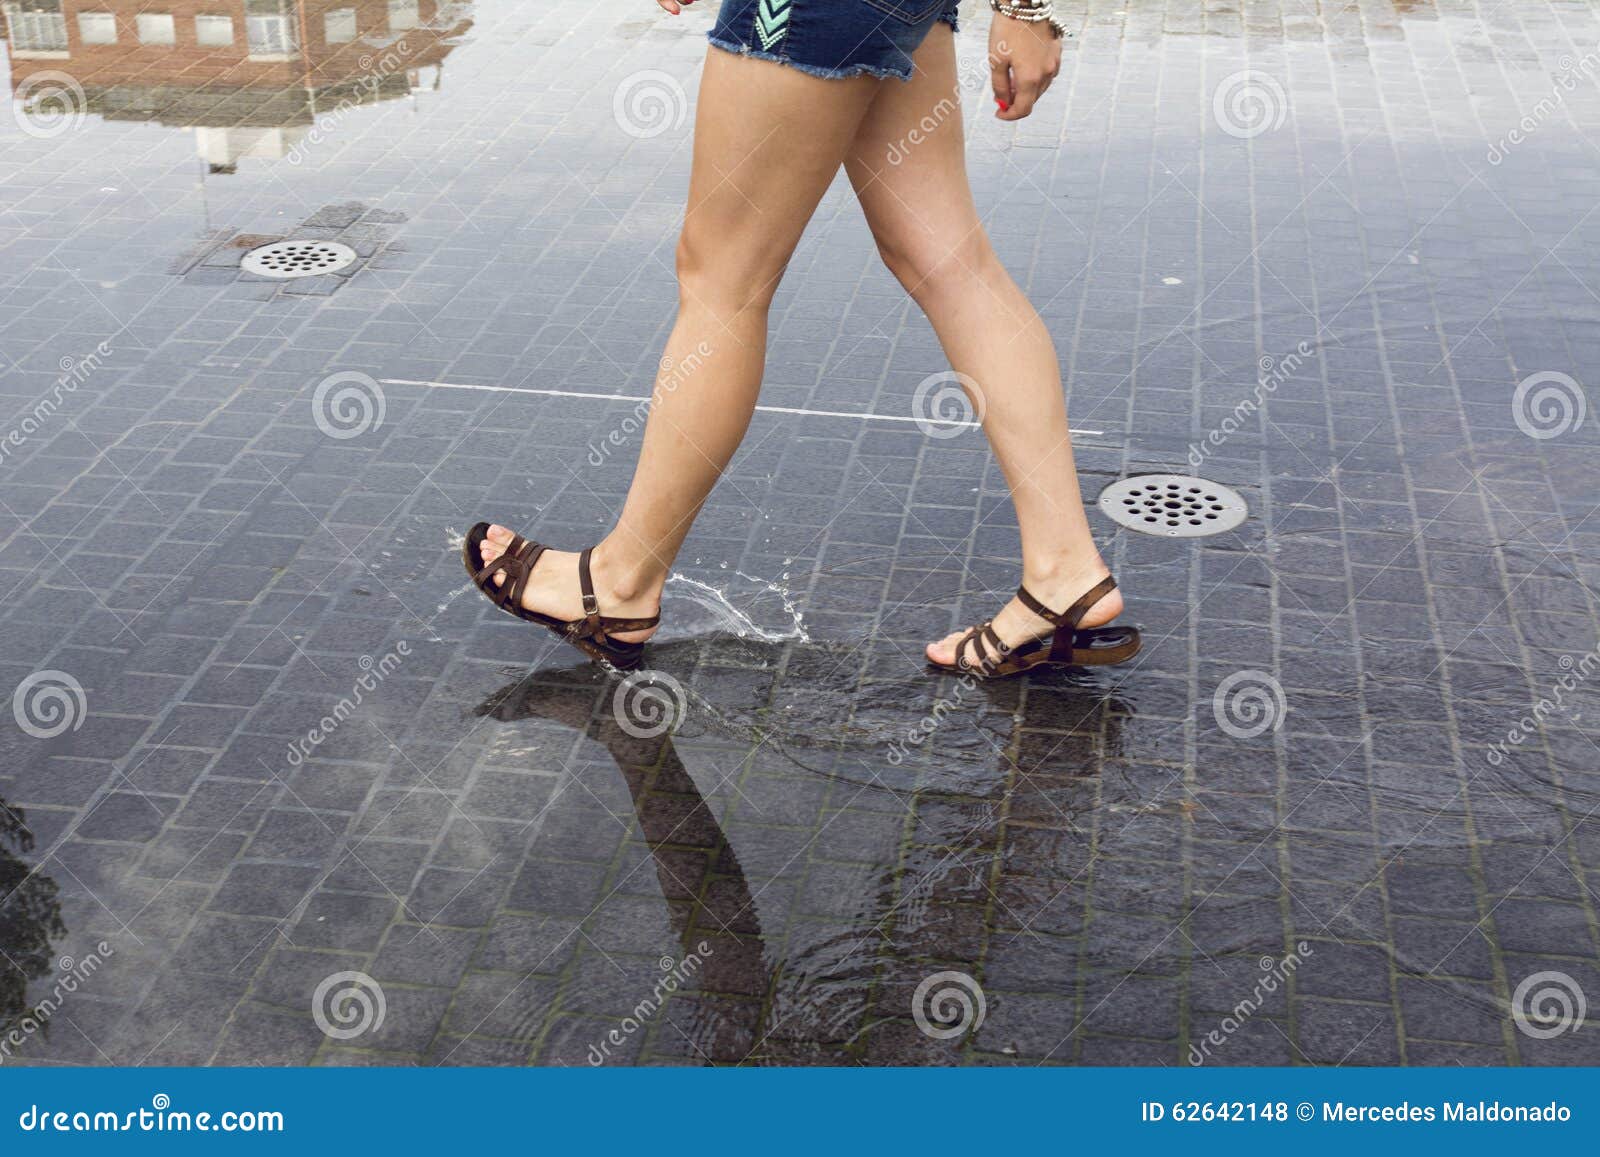 woman walking on a puddle in the street